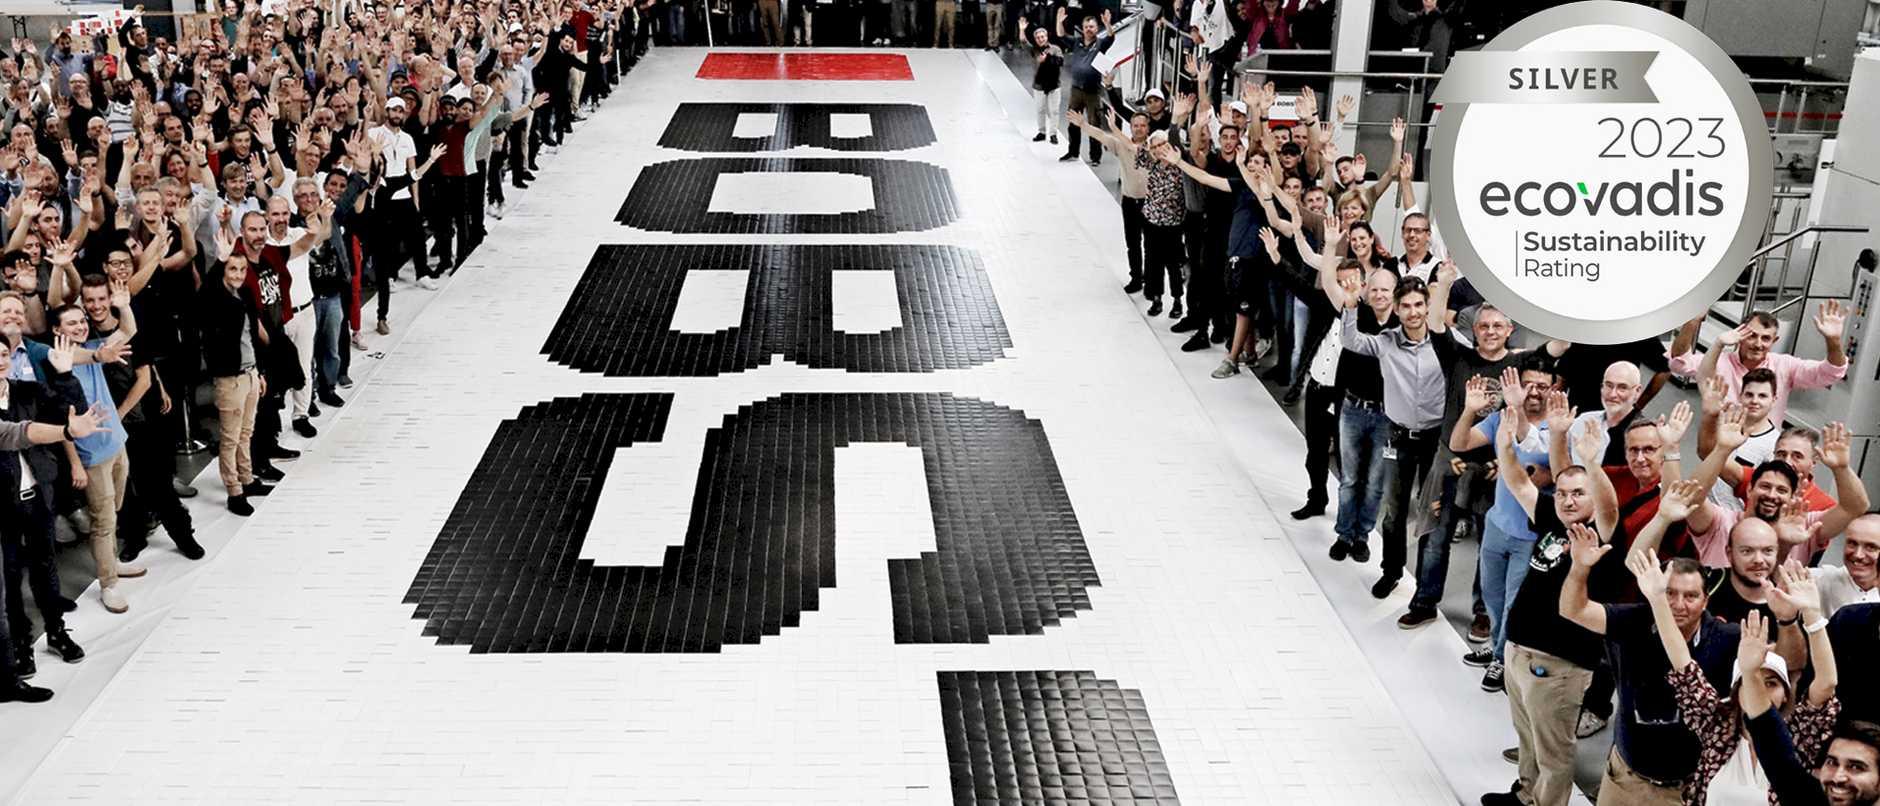 BOBST employees celebrating around a BOBST logo on the floor